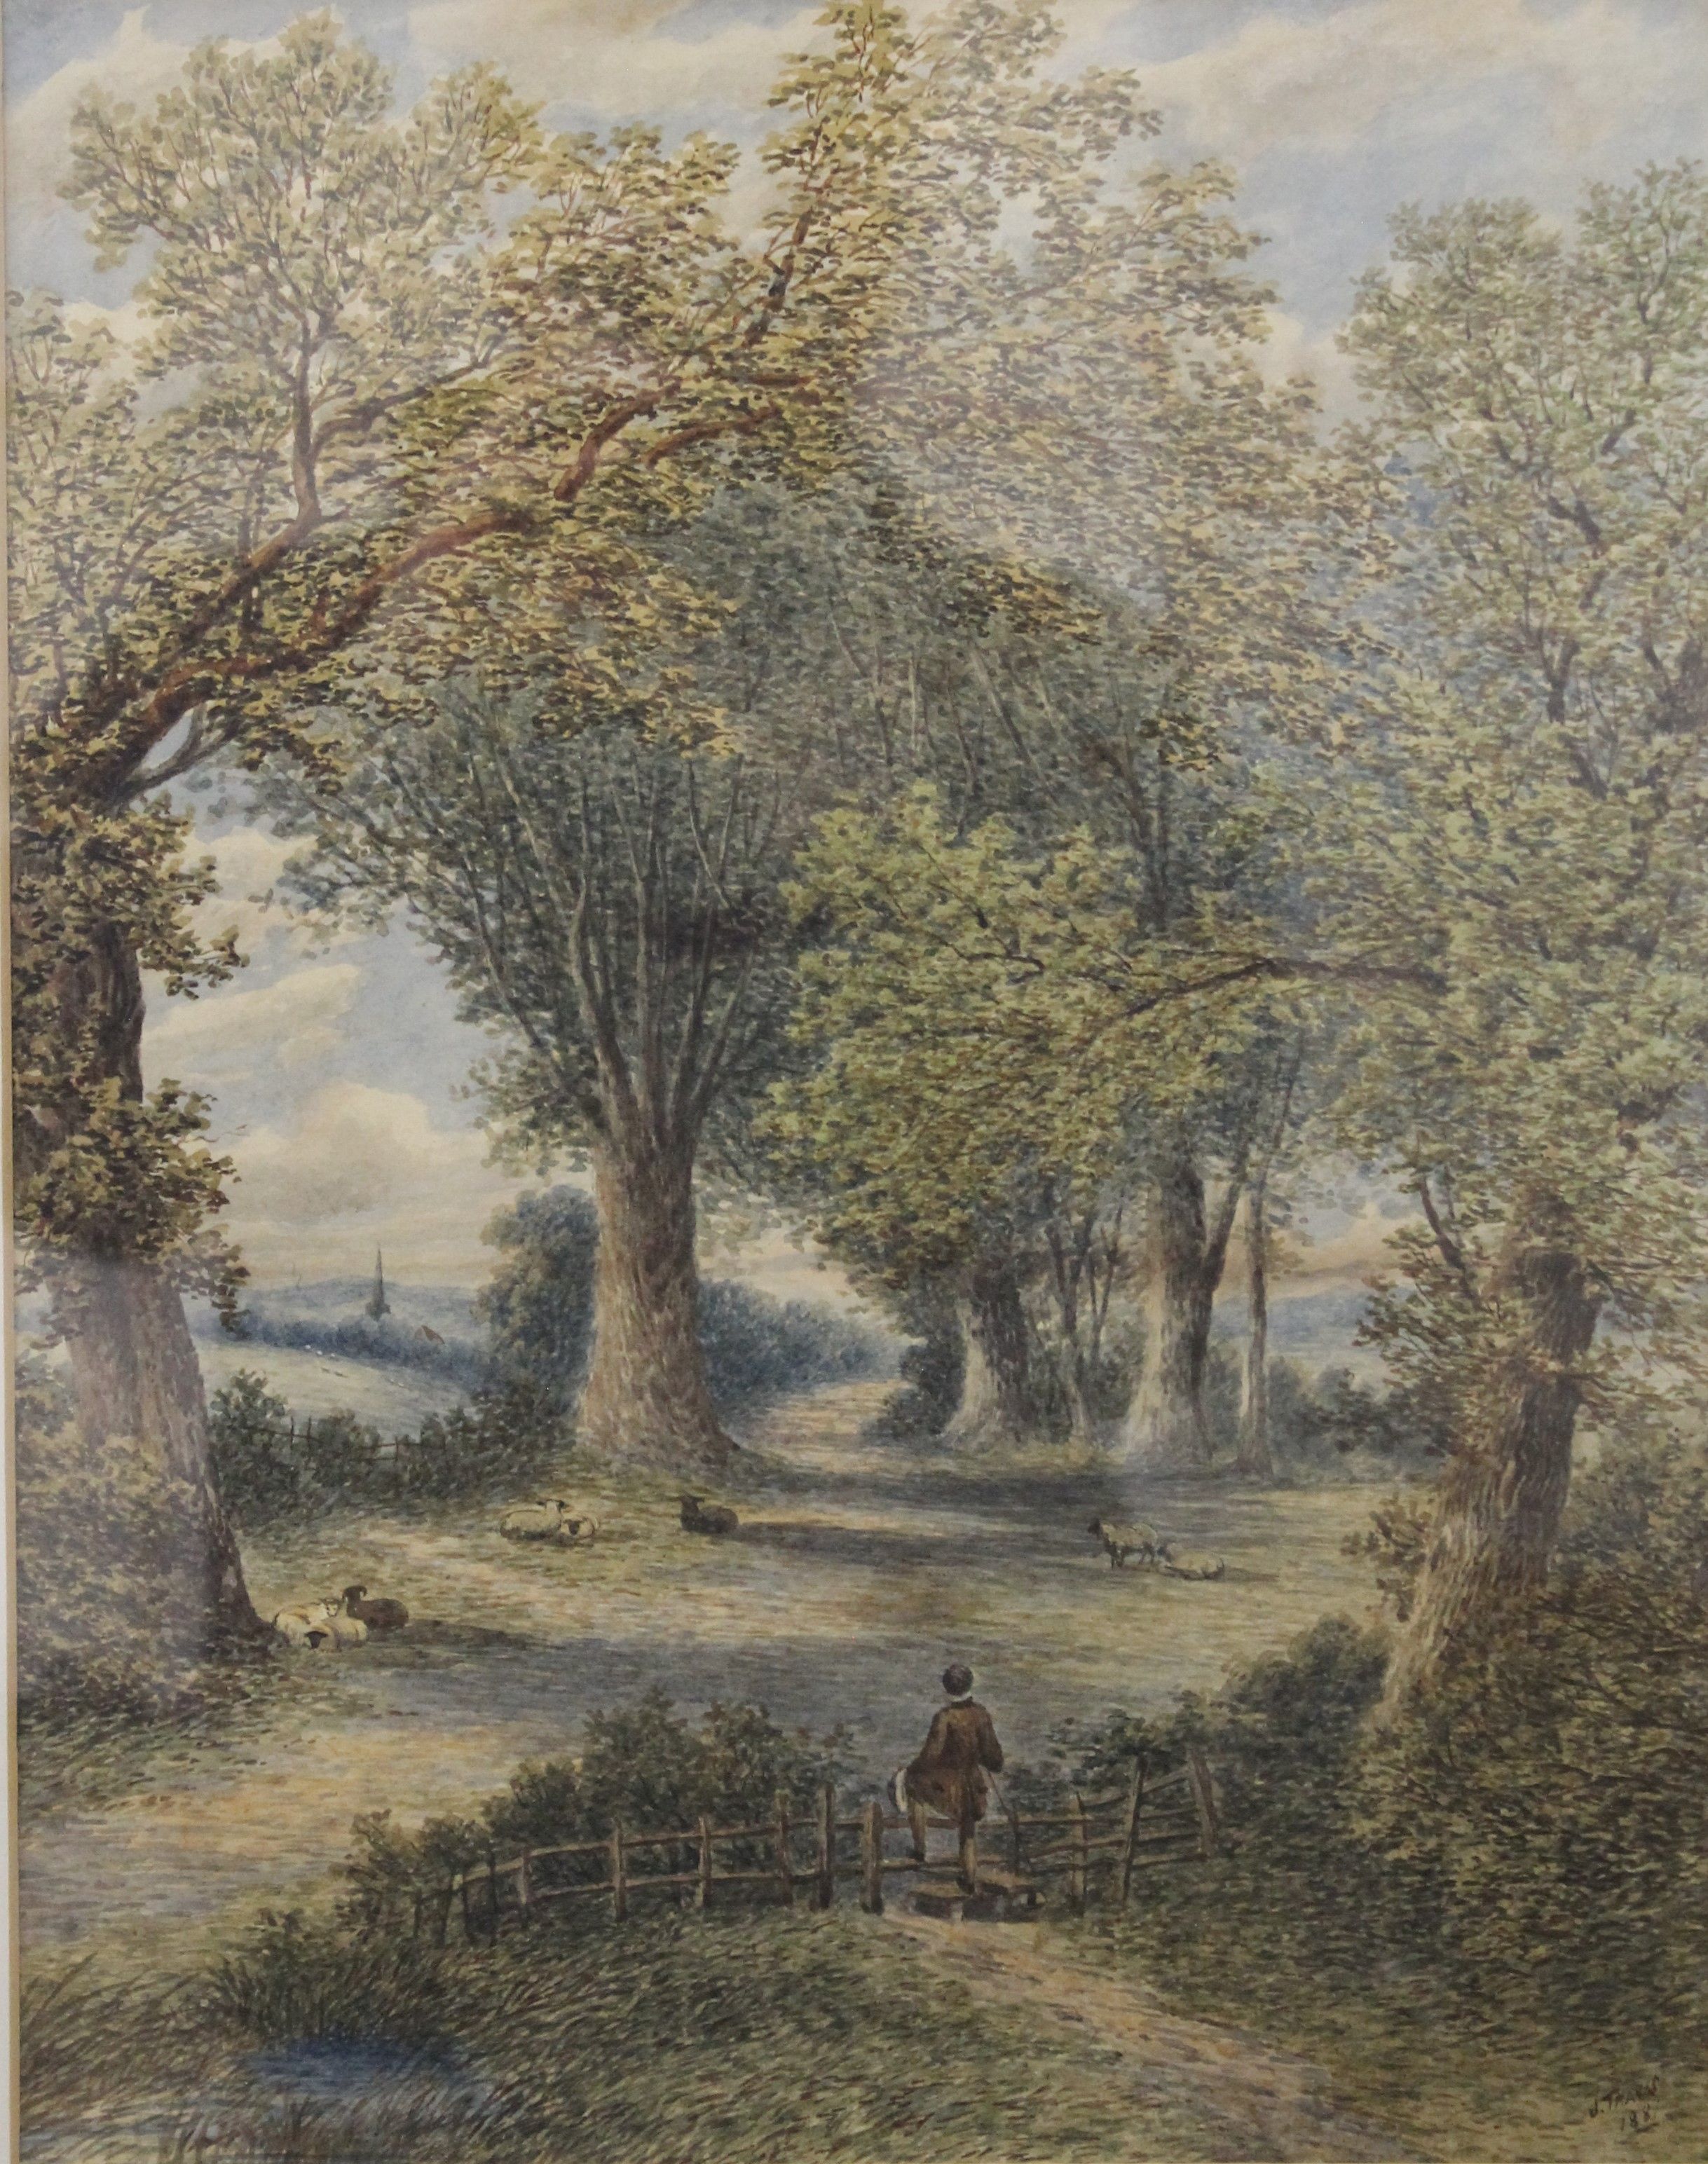 J TRAVIS, Shepherd Tending His Flock, watercolour, signed and dated 1881, framed and glazed.